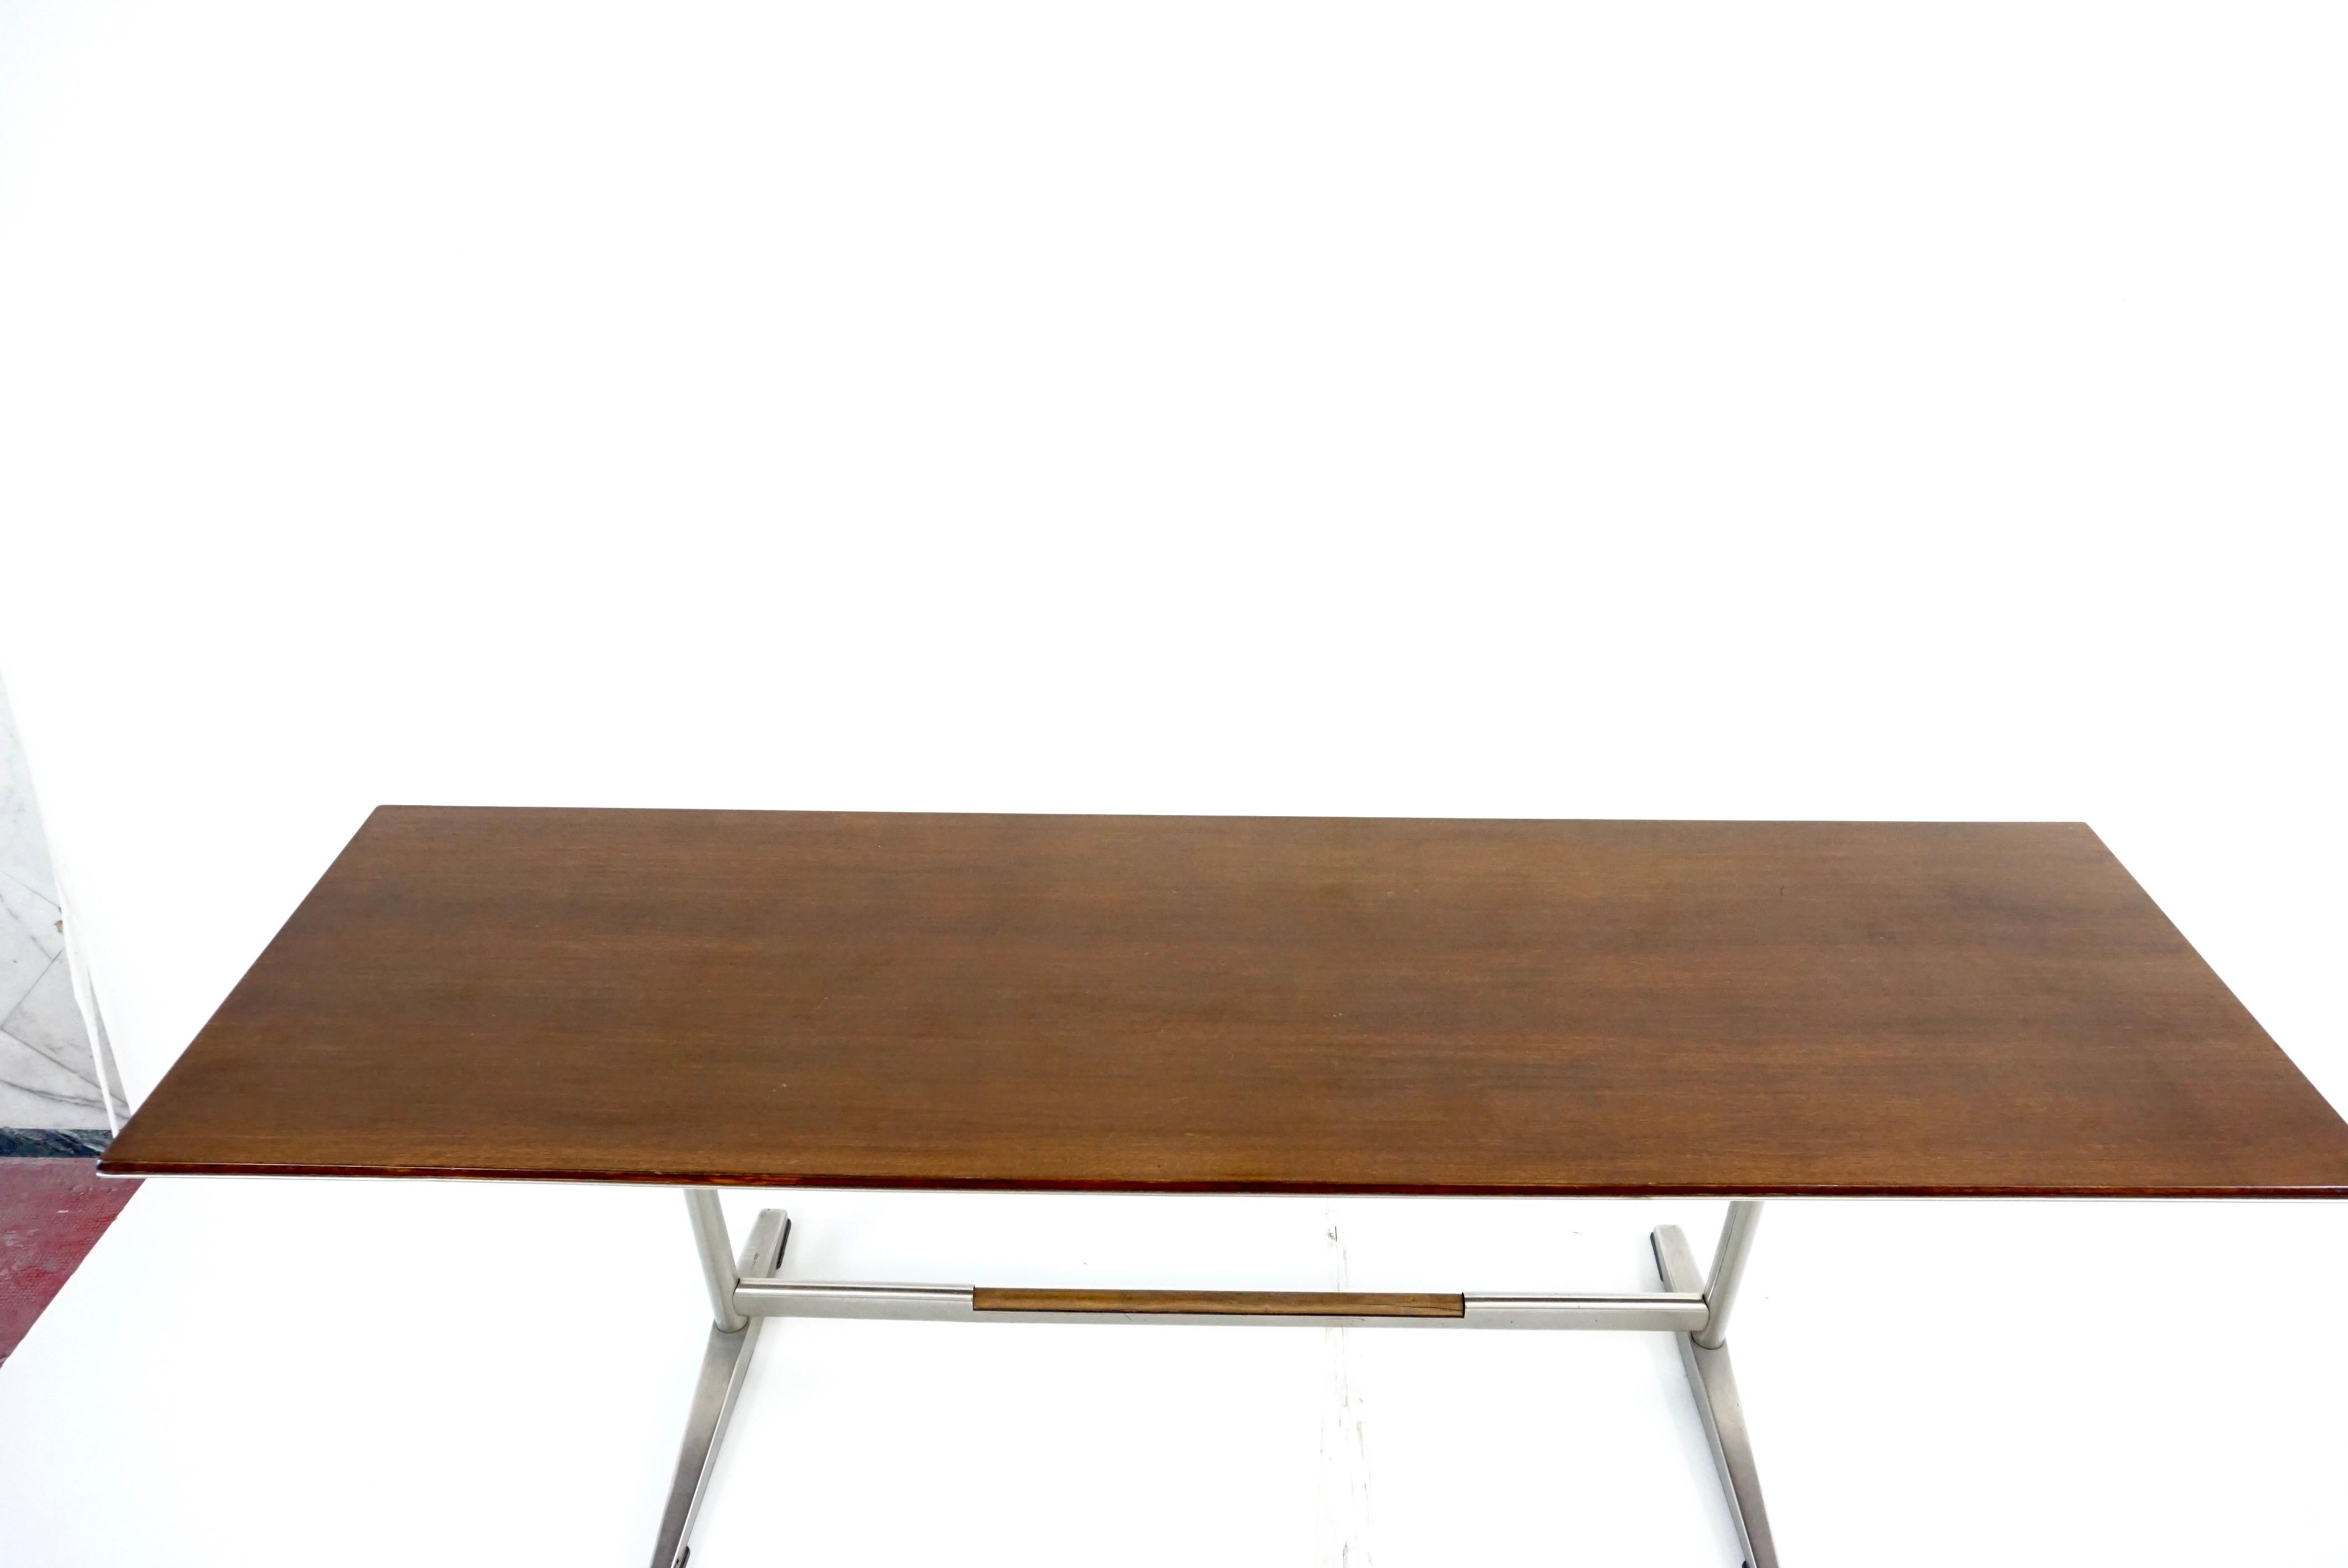 Mid-20th Century Rare Executive Desk Table by Gio Ponti for Pirelli Tower in Milan, by RIMA 1961